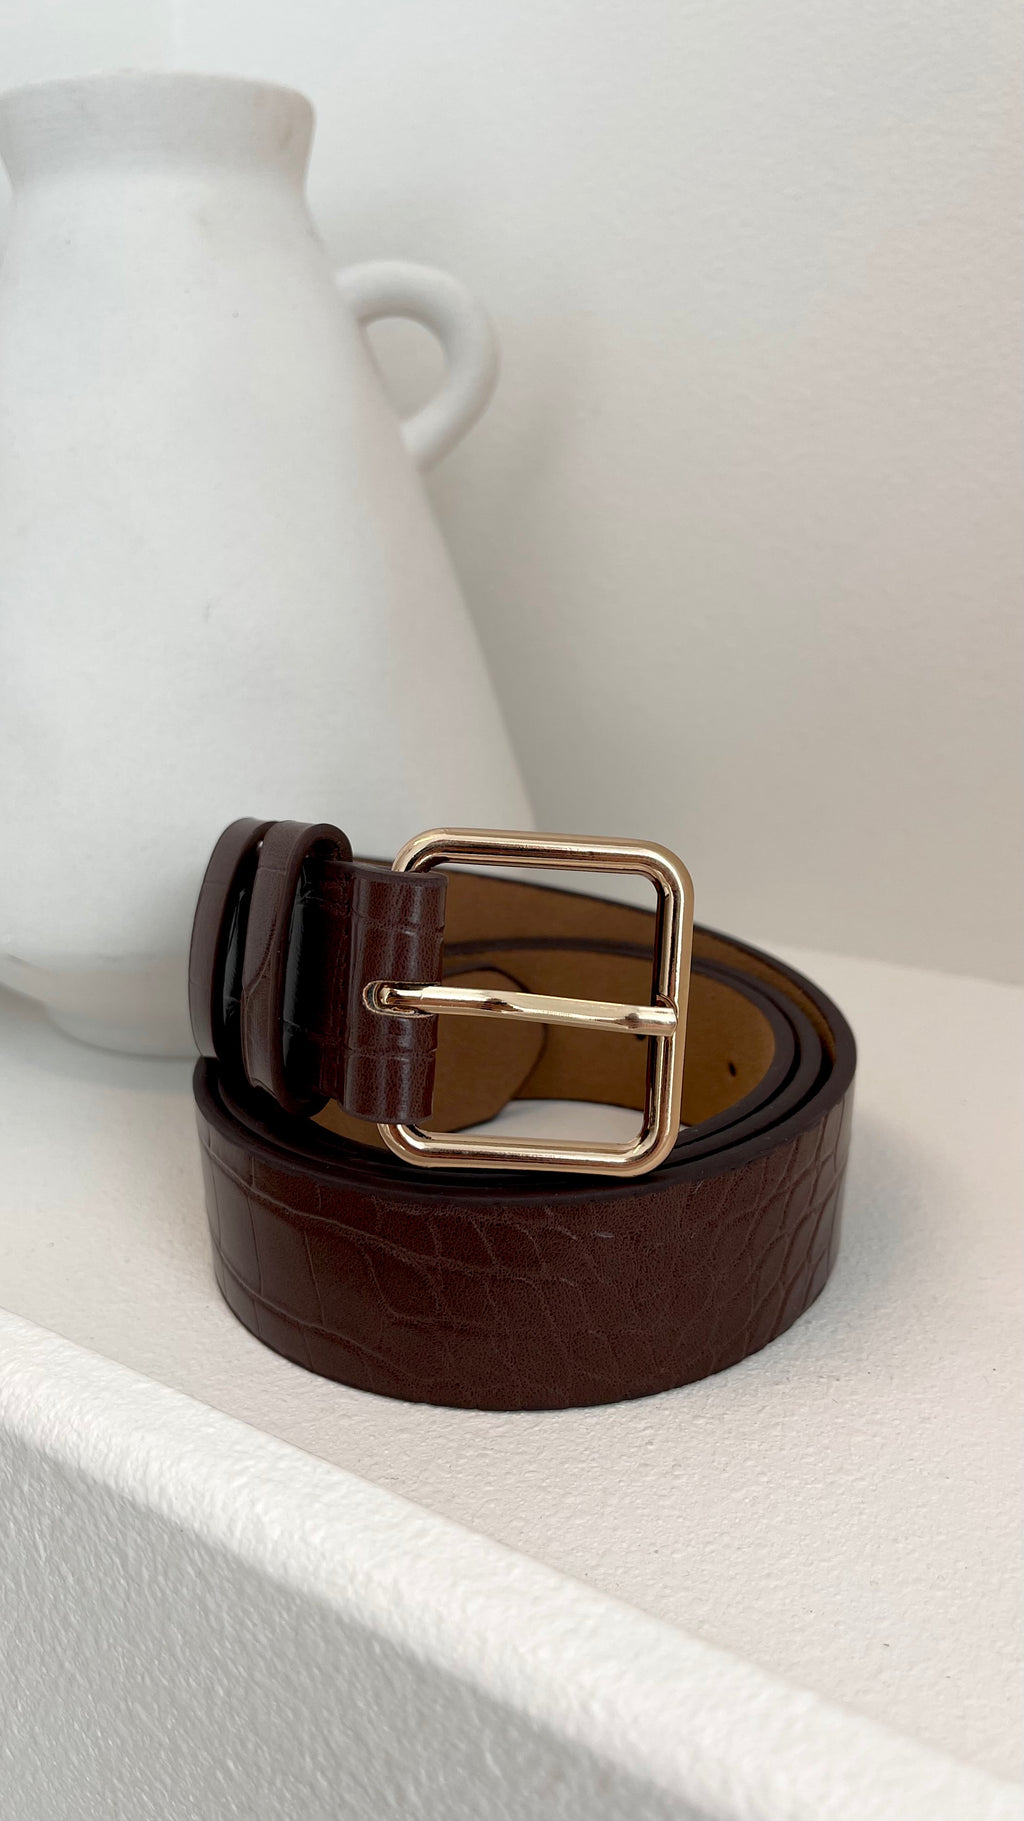 Aira Square Buckle Croc Belt - Brown / Gold - Billy J